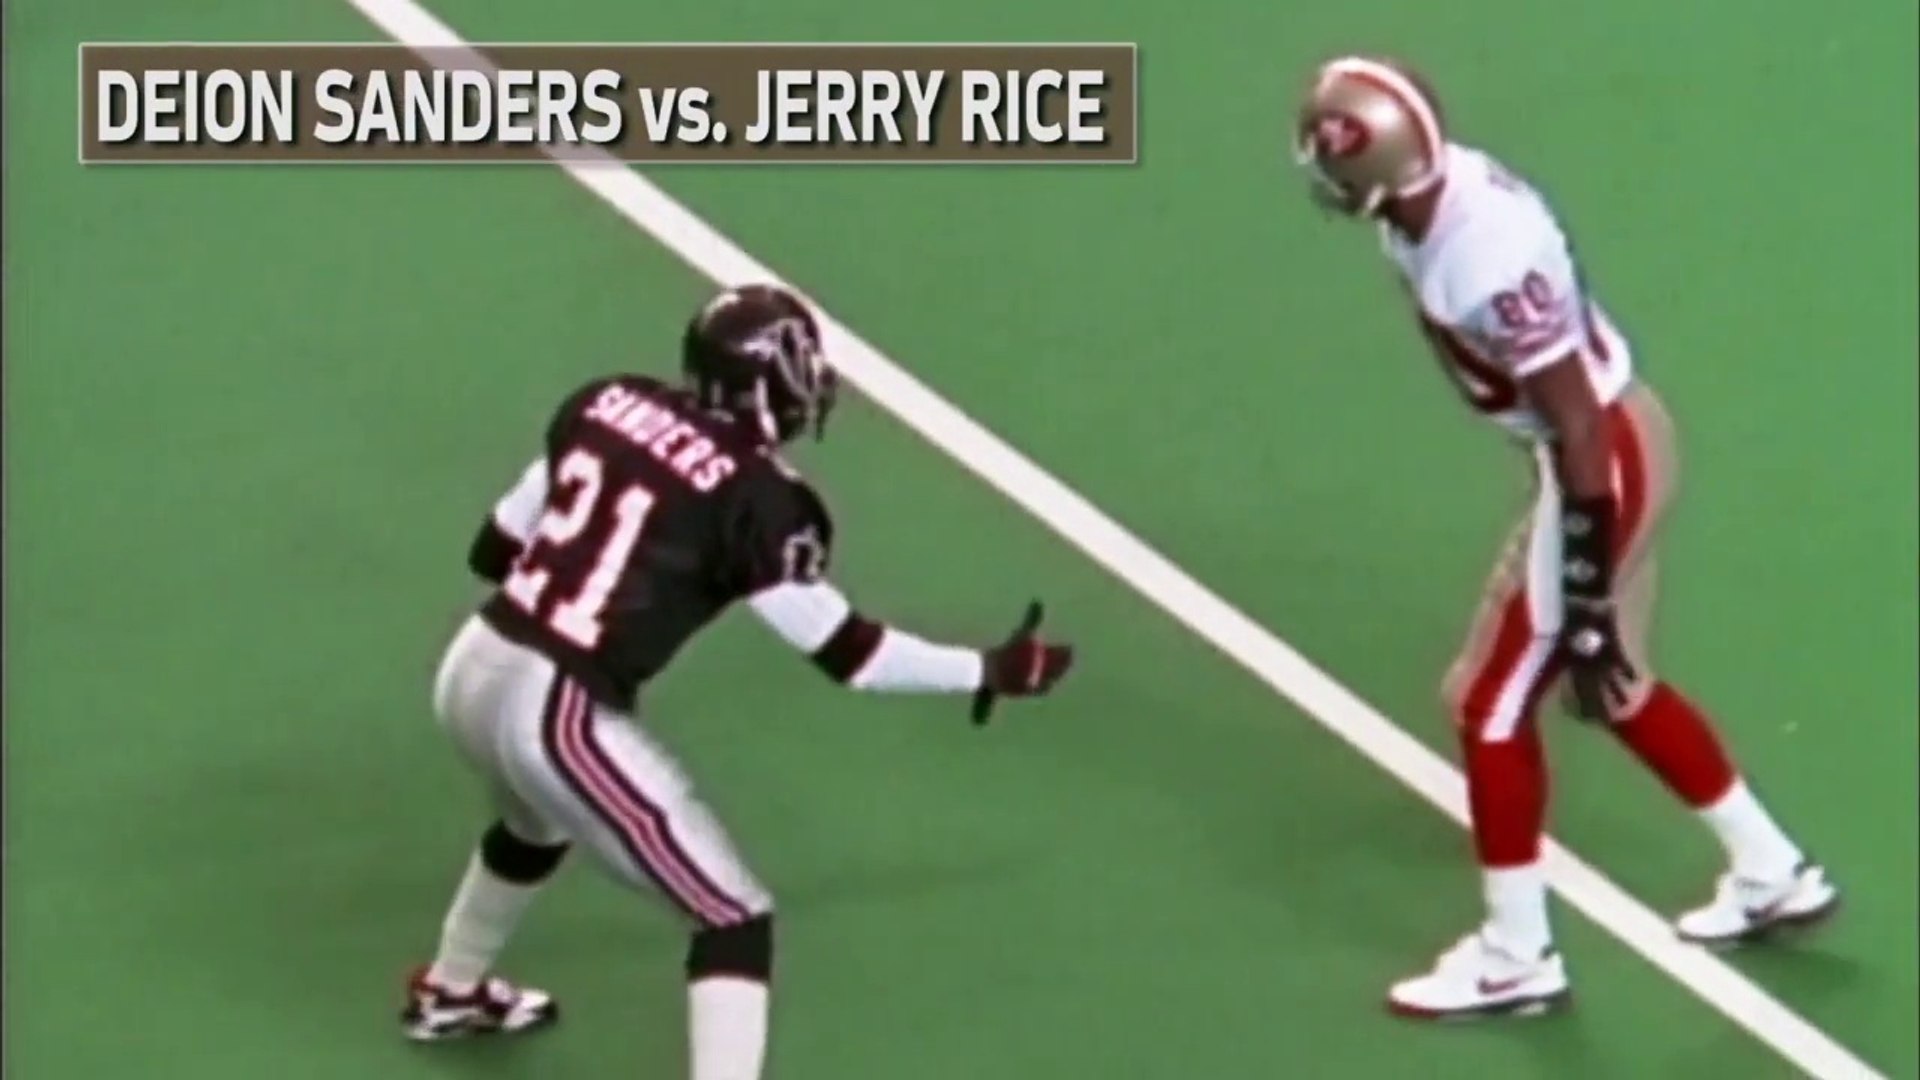 Jerry Rice vs. Deion Sanders Head-to-Head Highlights- The GOAT vs. Prime  Time - NFL - USA SPORTS - video Dailymotion